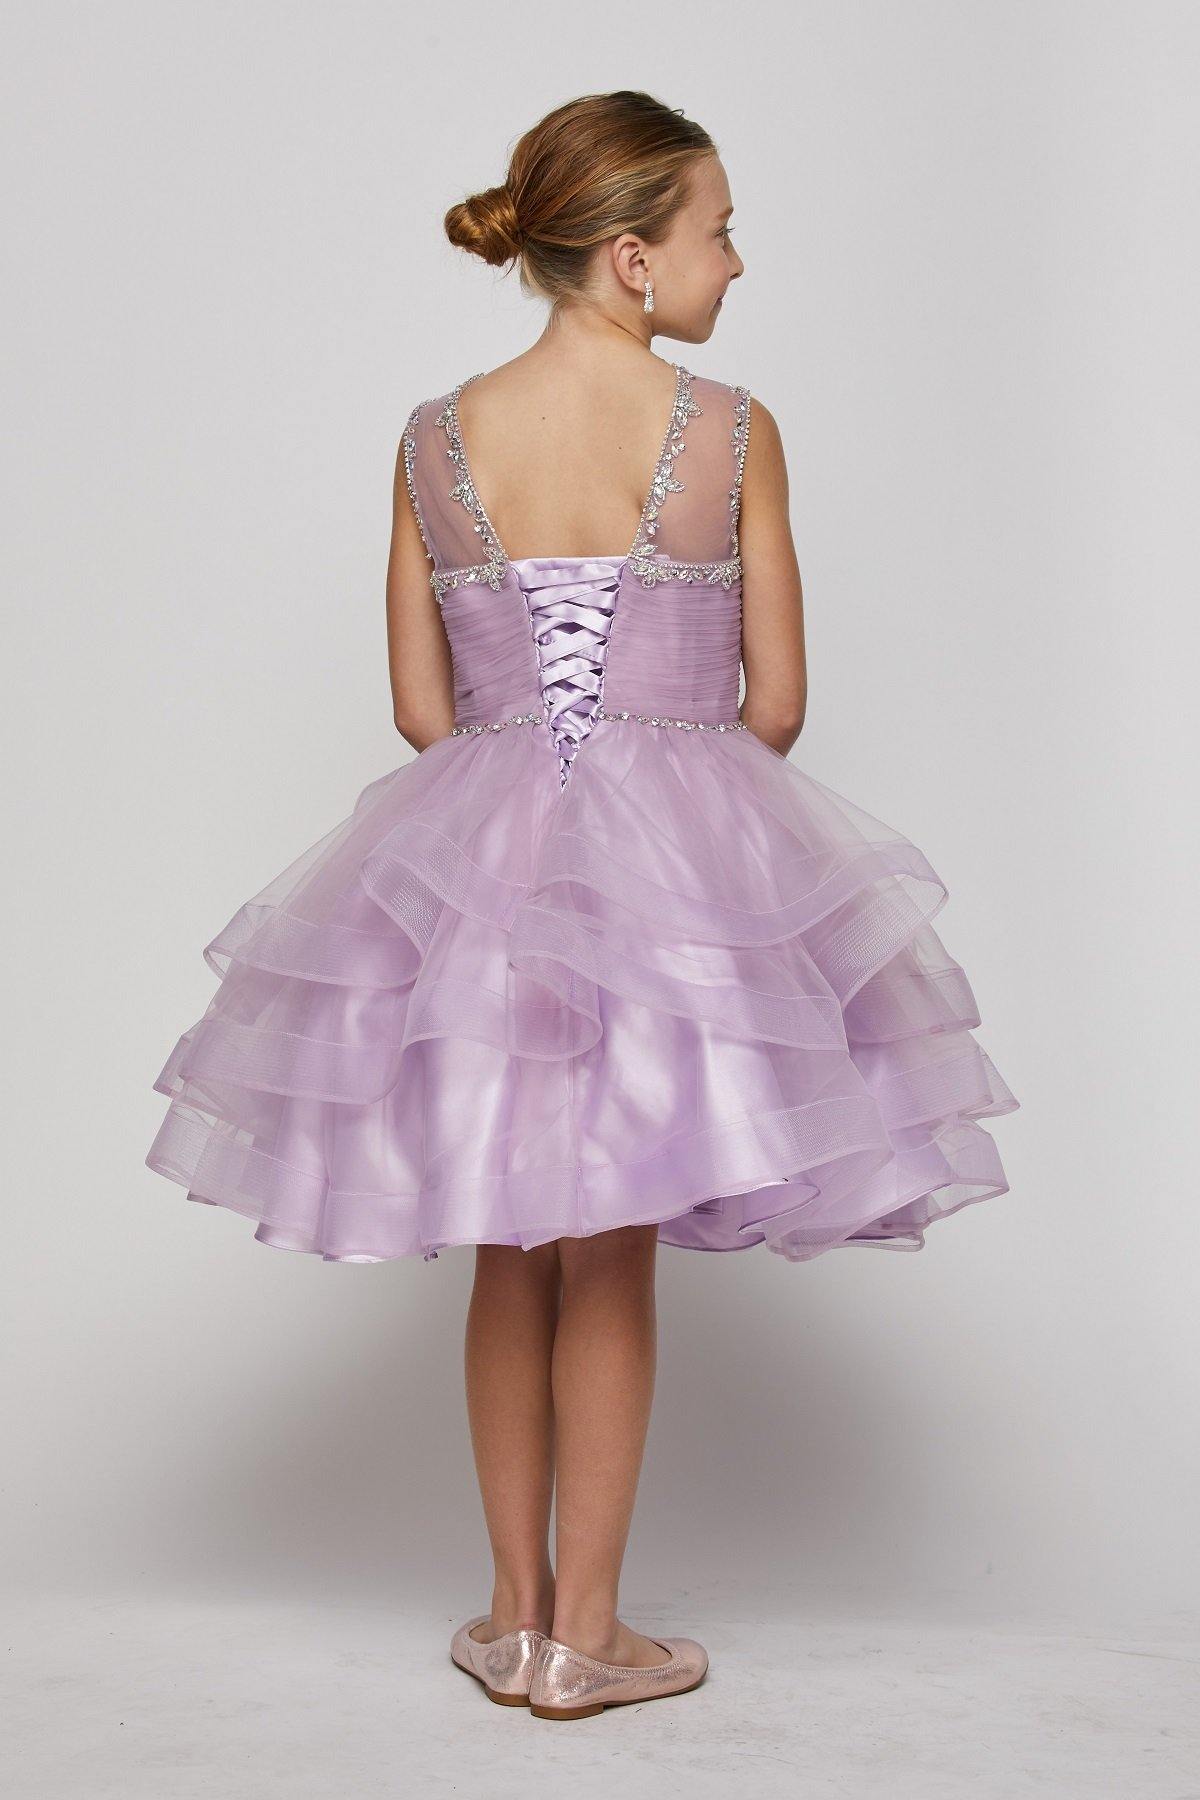 Short Beaded Illusion Neckline Flower Girl Dress - The Dress Outlet Cinderella Couture